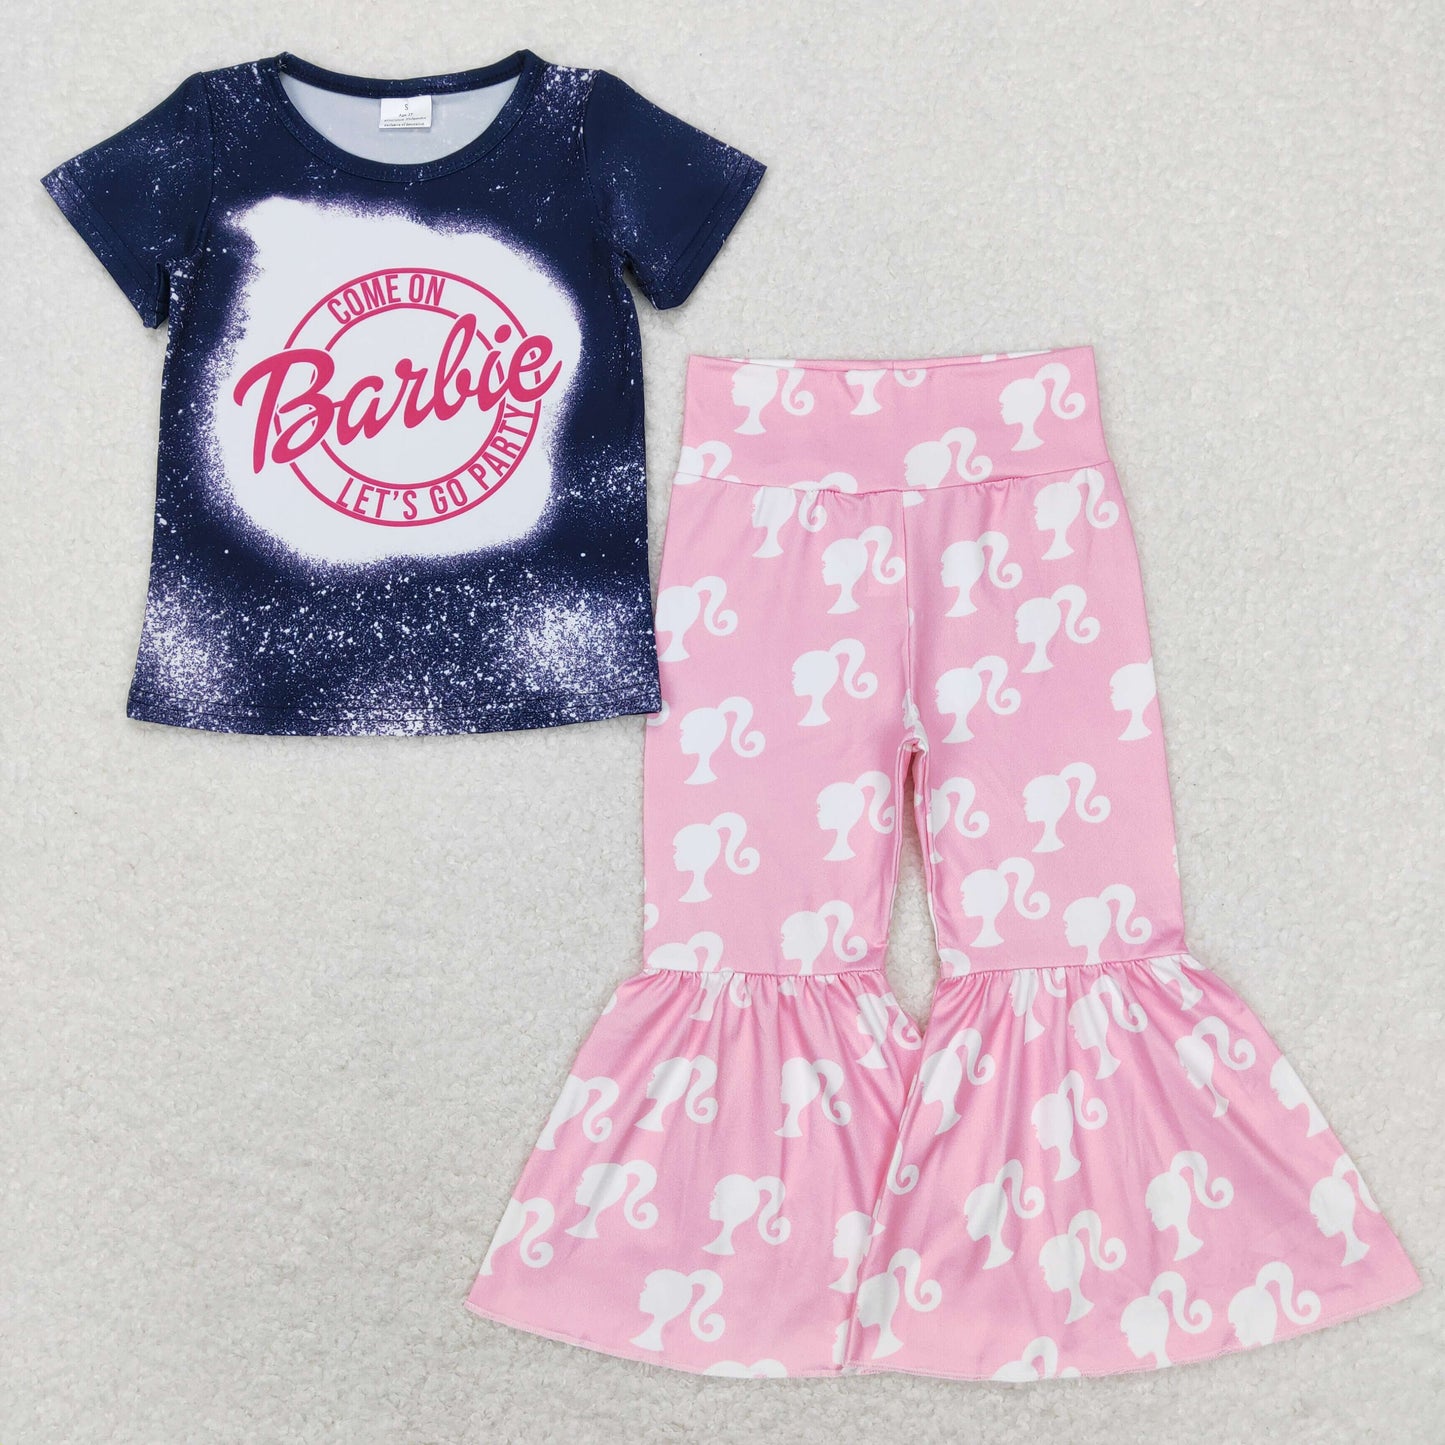 GSPO1353 Come On Let's Go Party Pink BA Navy Top Pink Bell Pants Girls Clothes Set